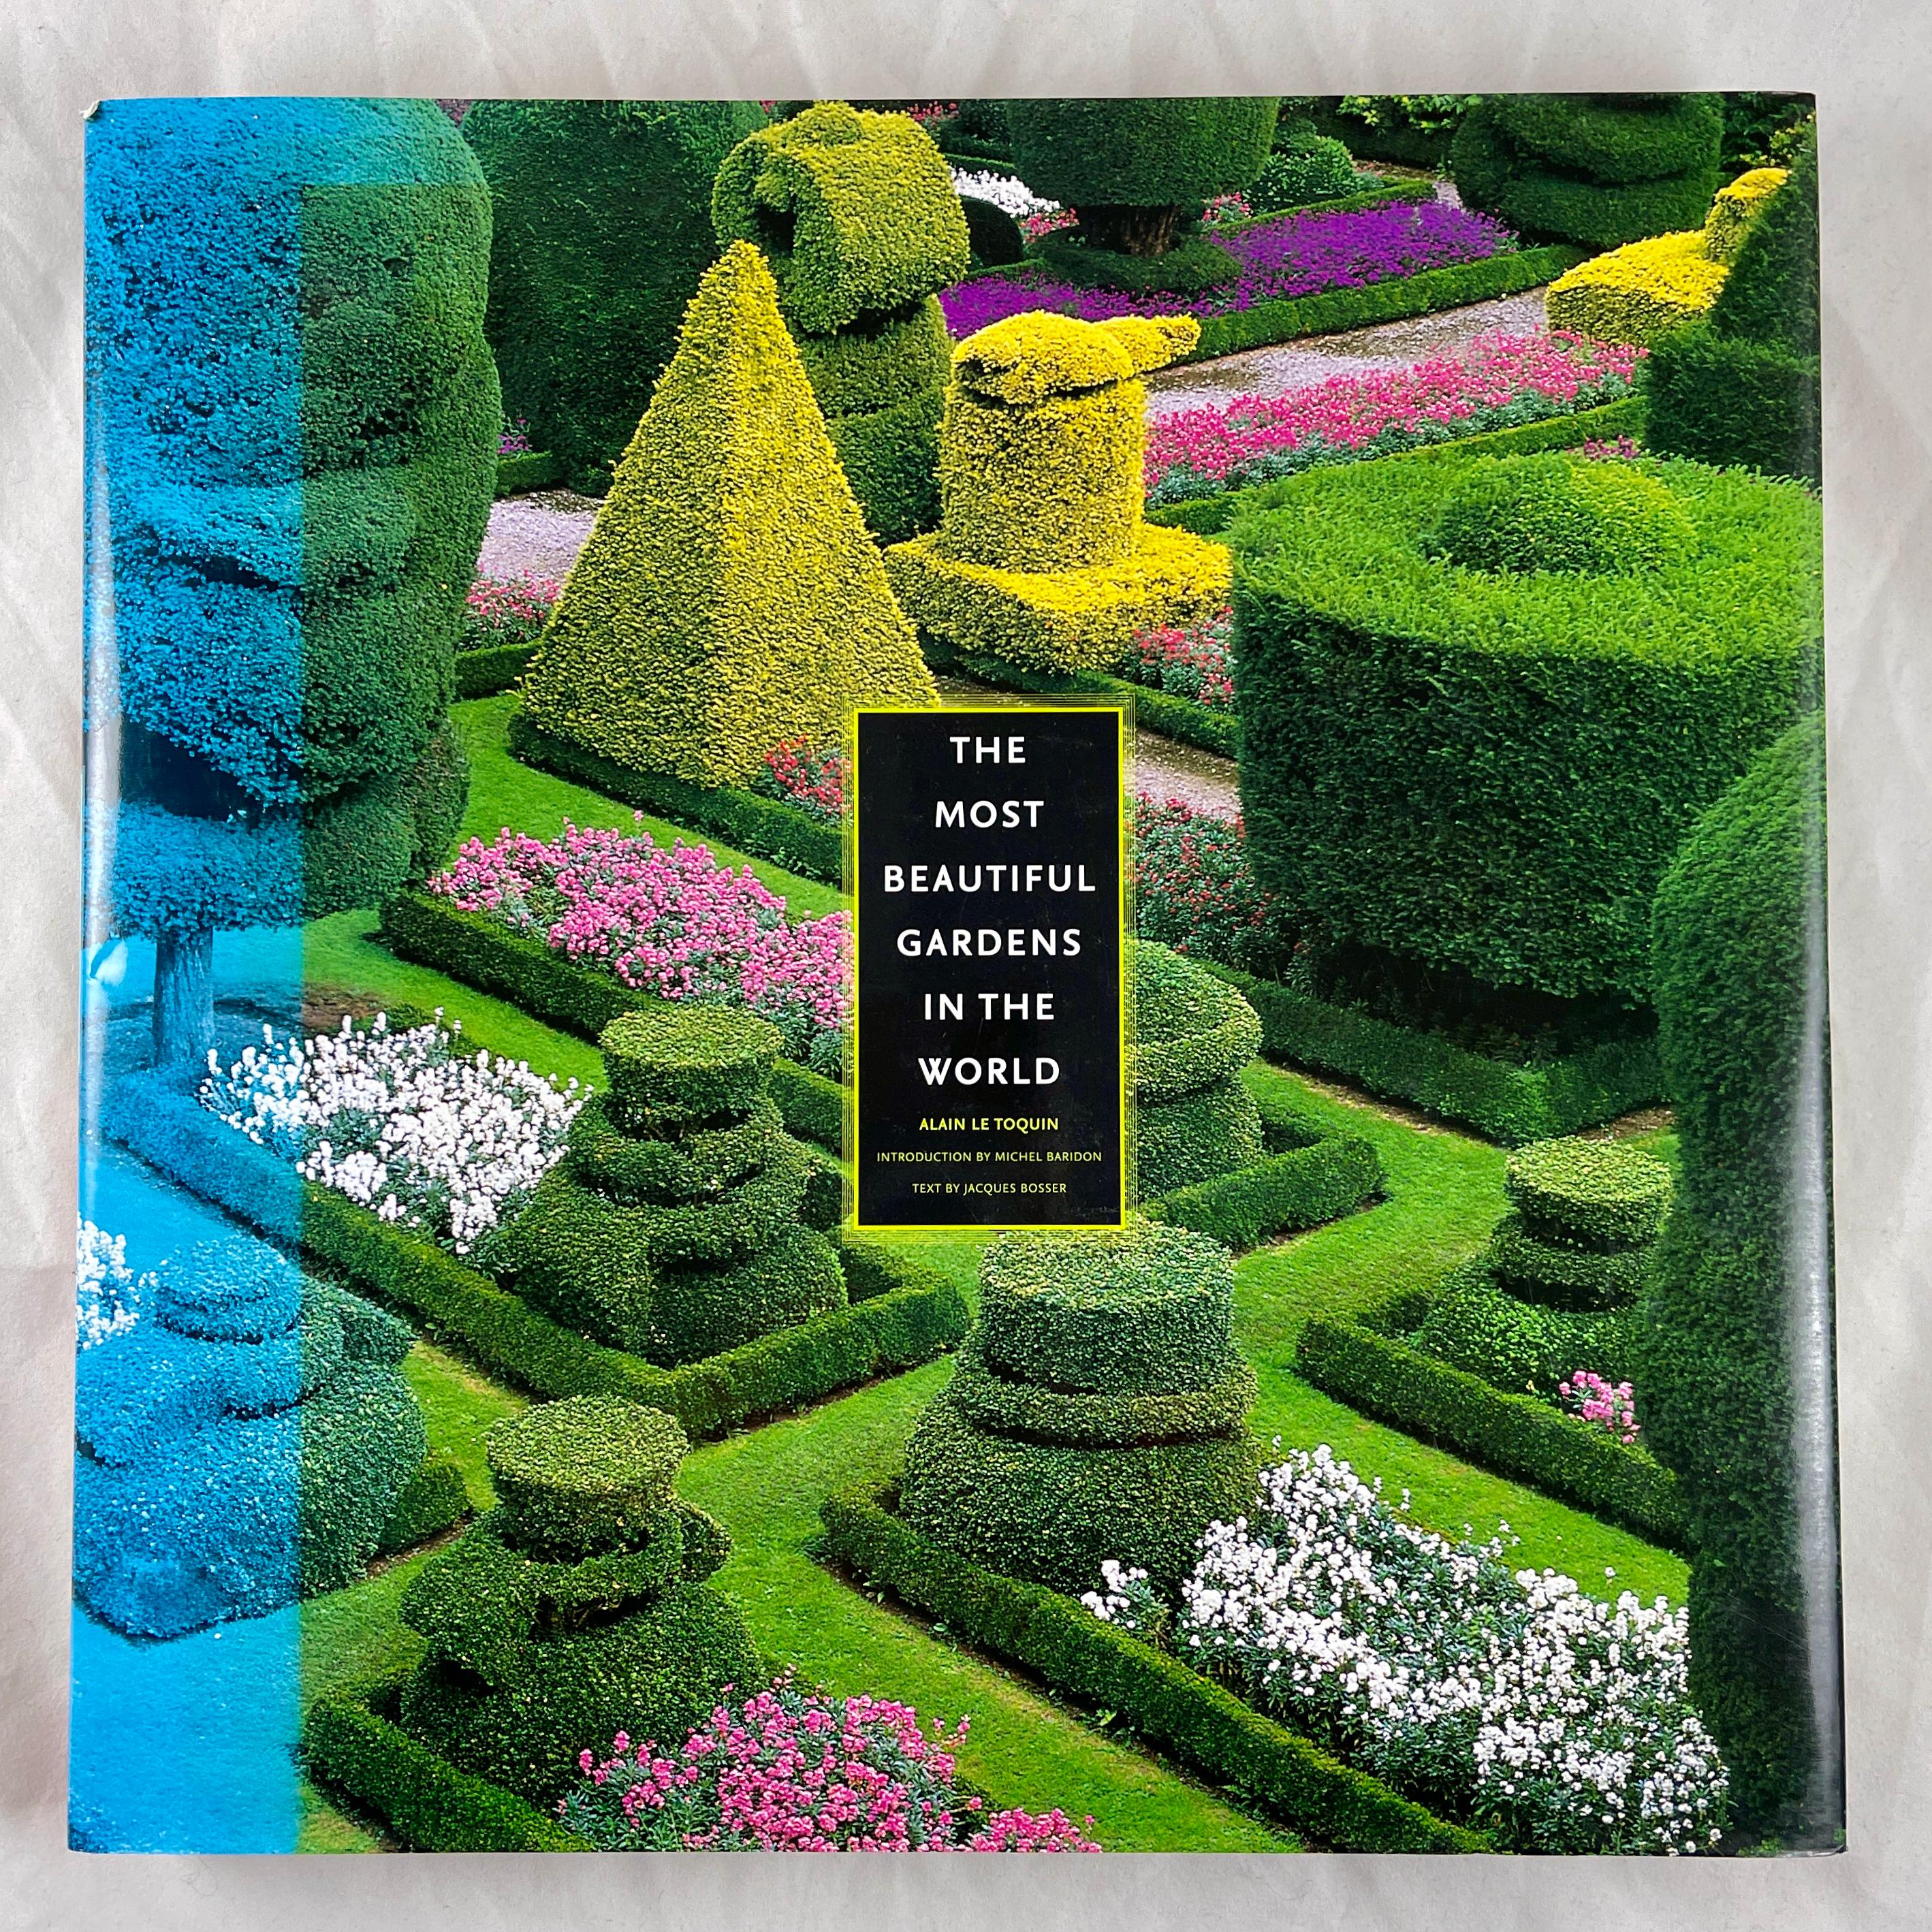 The Most Beautiful Gardens in the World, Hardcover Book, 2004 1